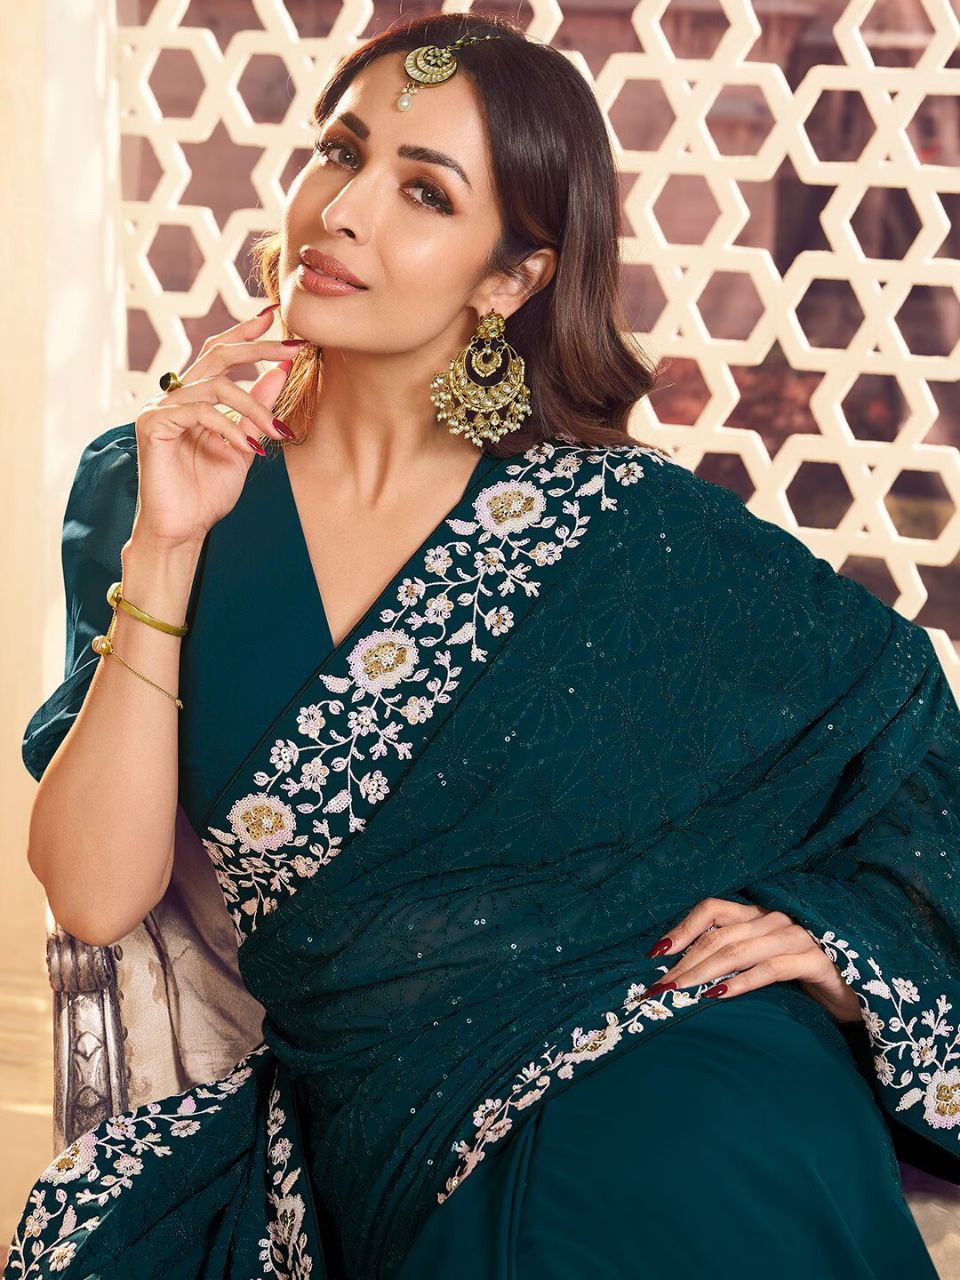 Bollywood Celebrity-Inspired Bottle Green Saree